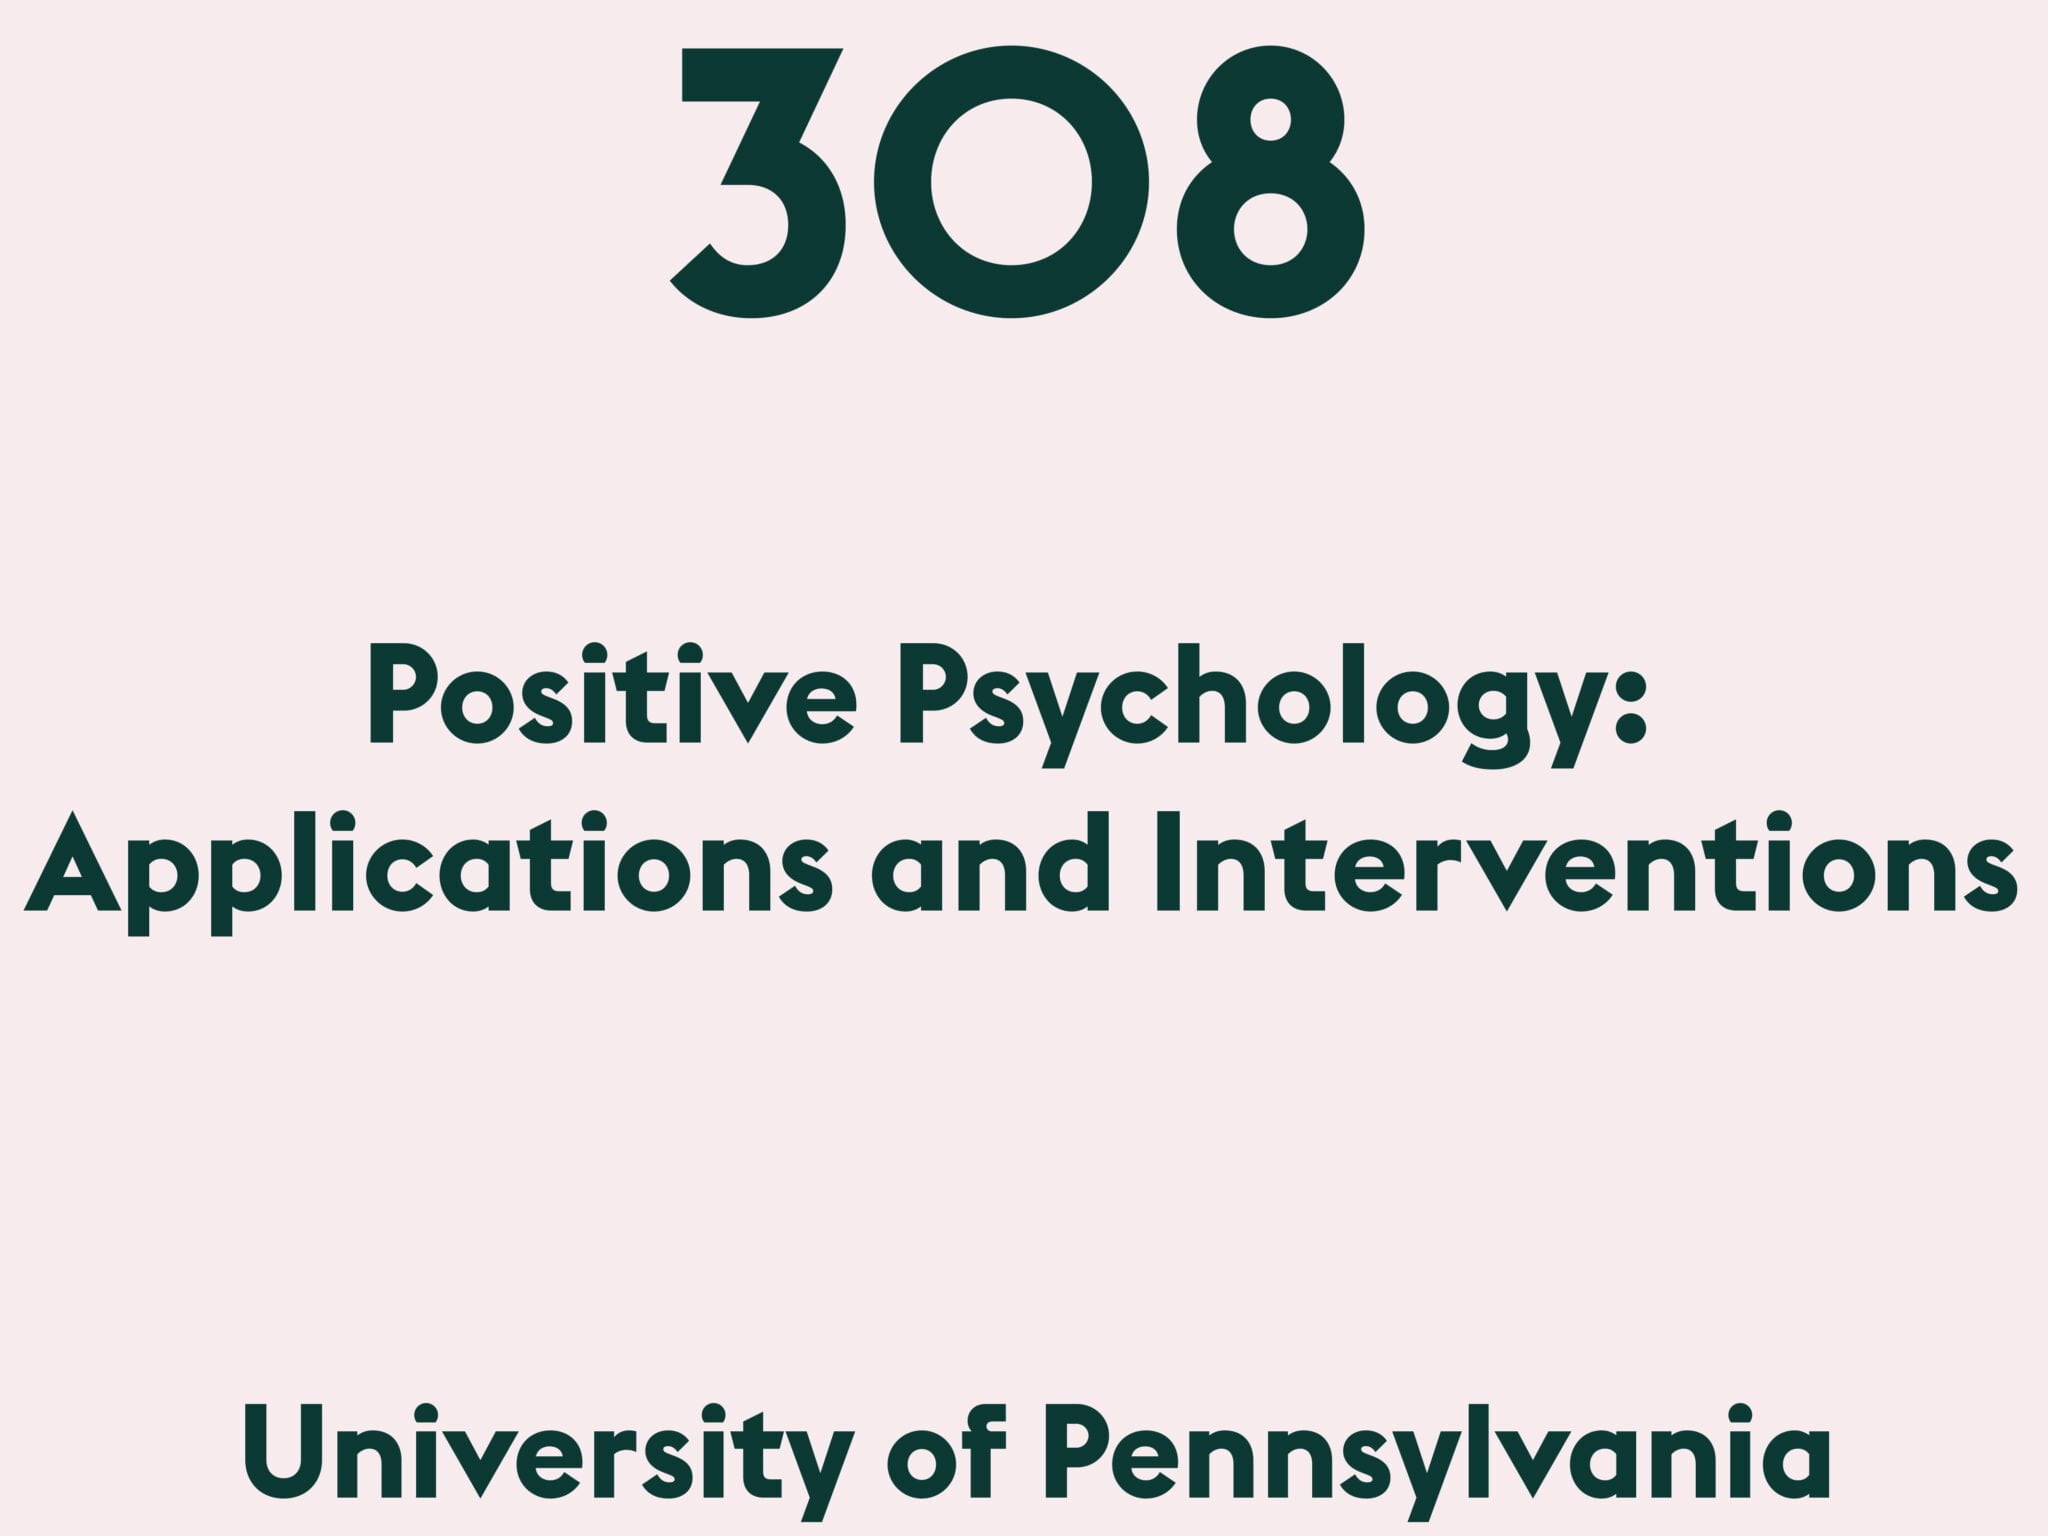 Positive Psychology: Applications and Interventions